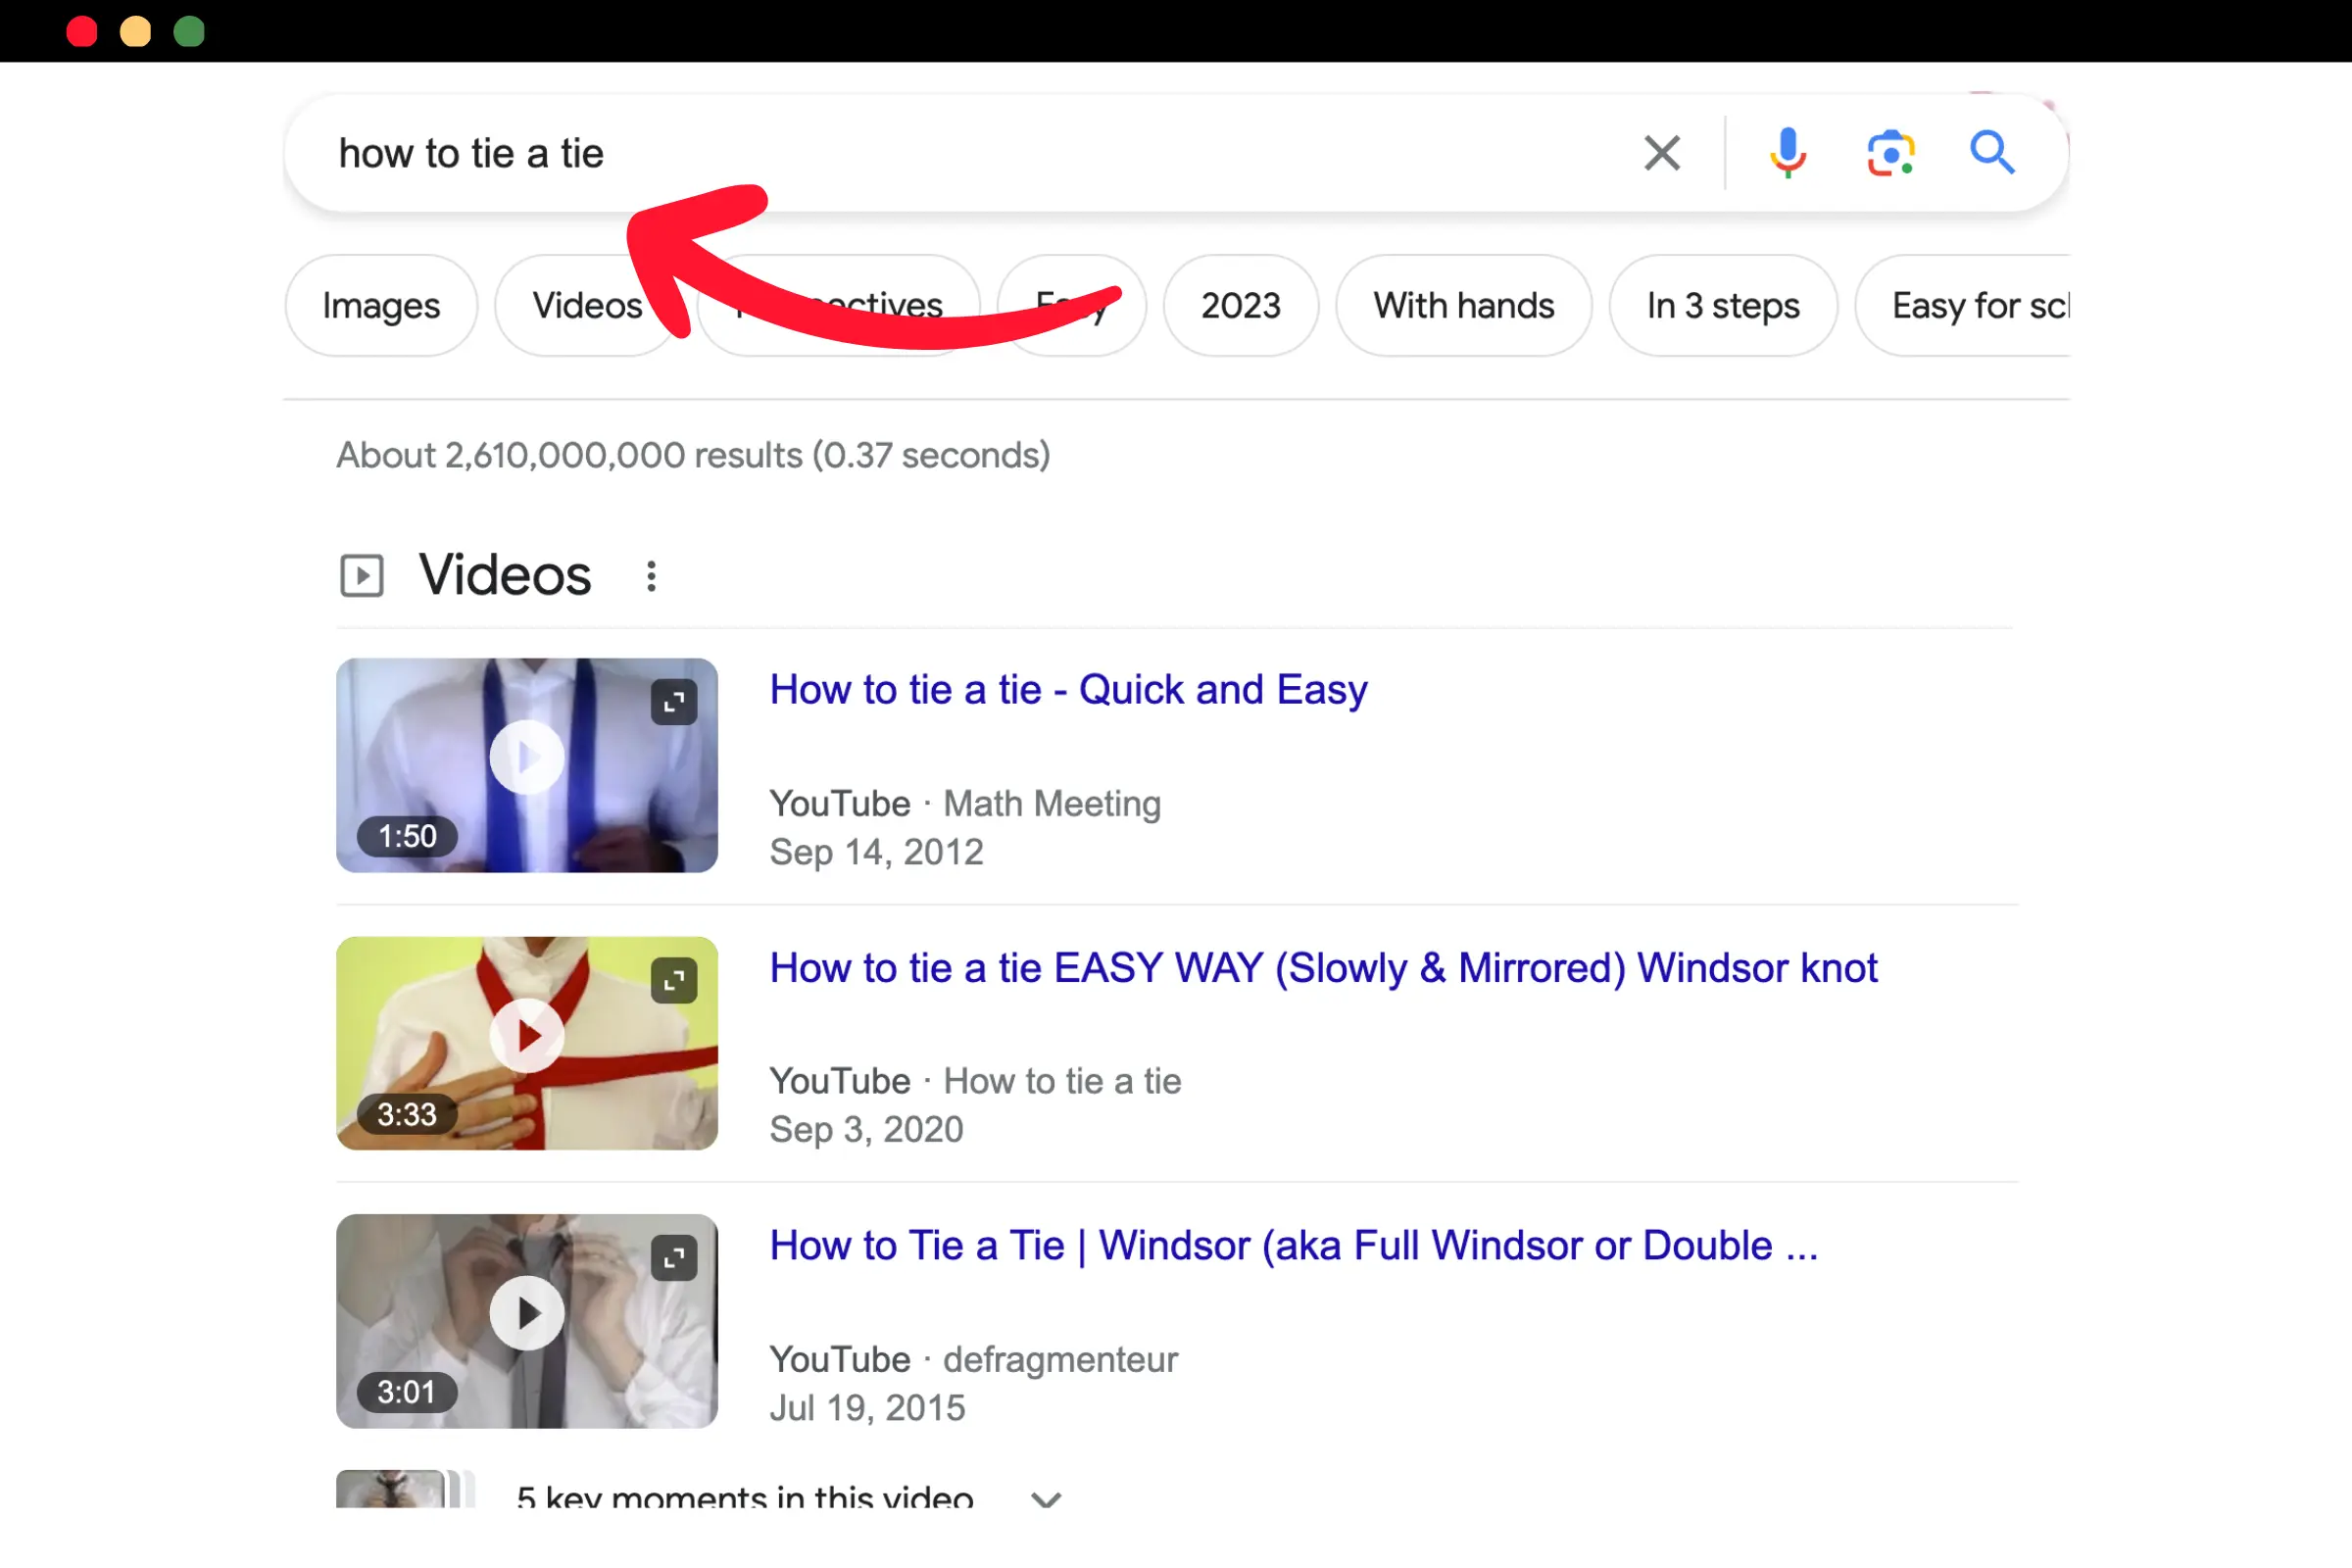 Featured Snippets - Video